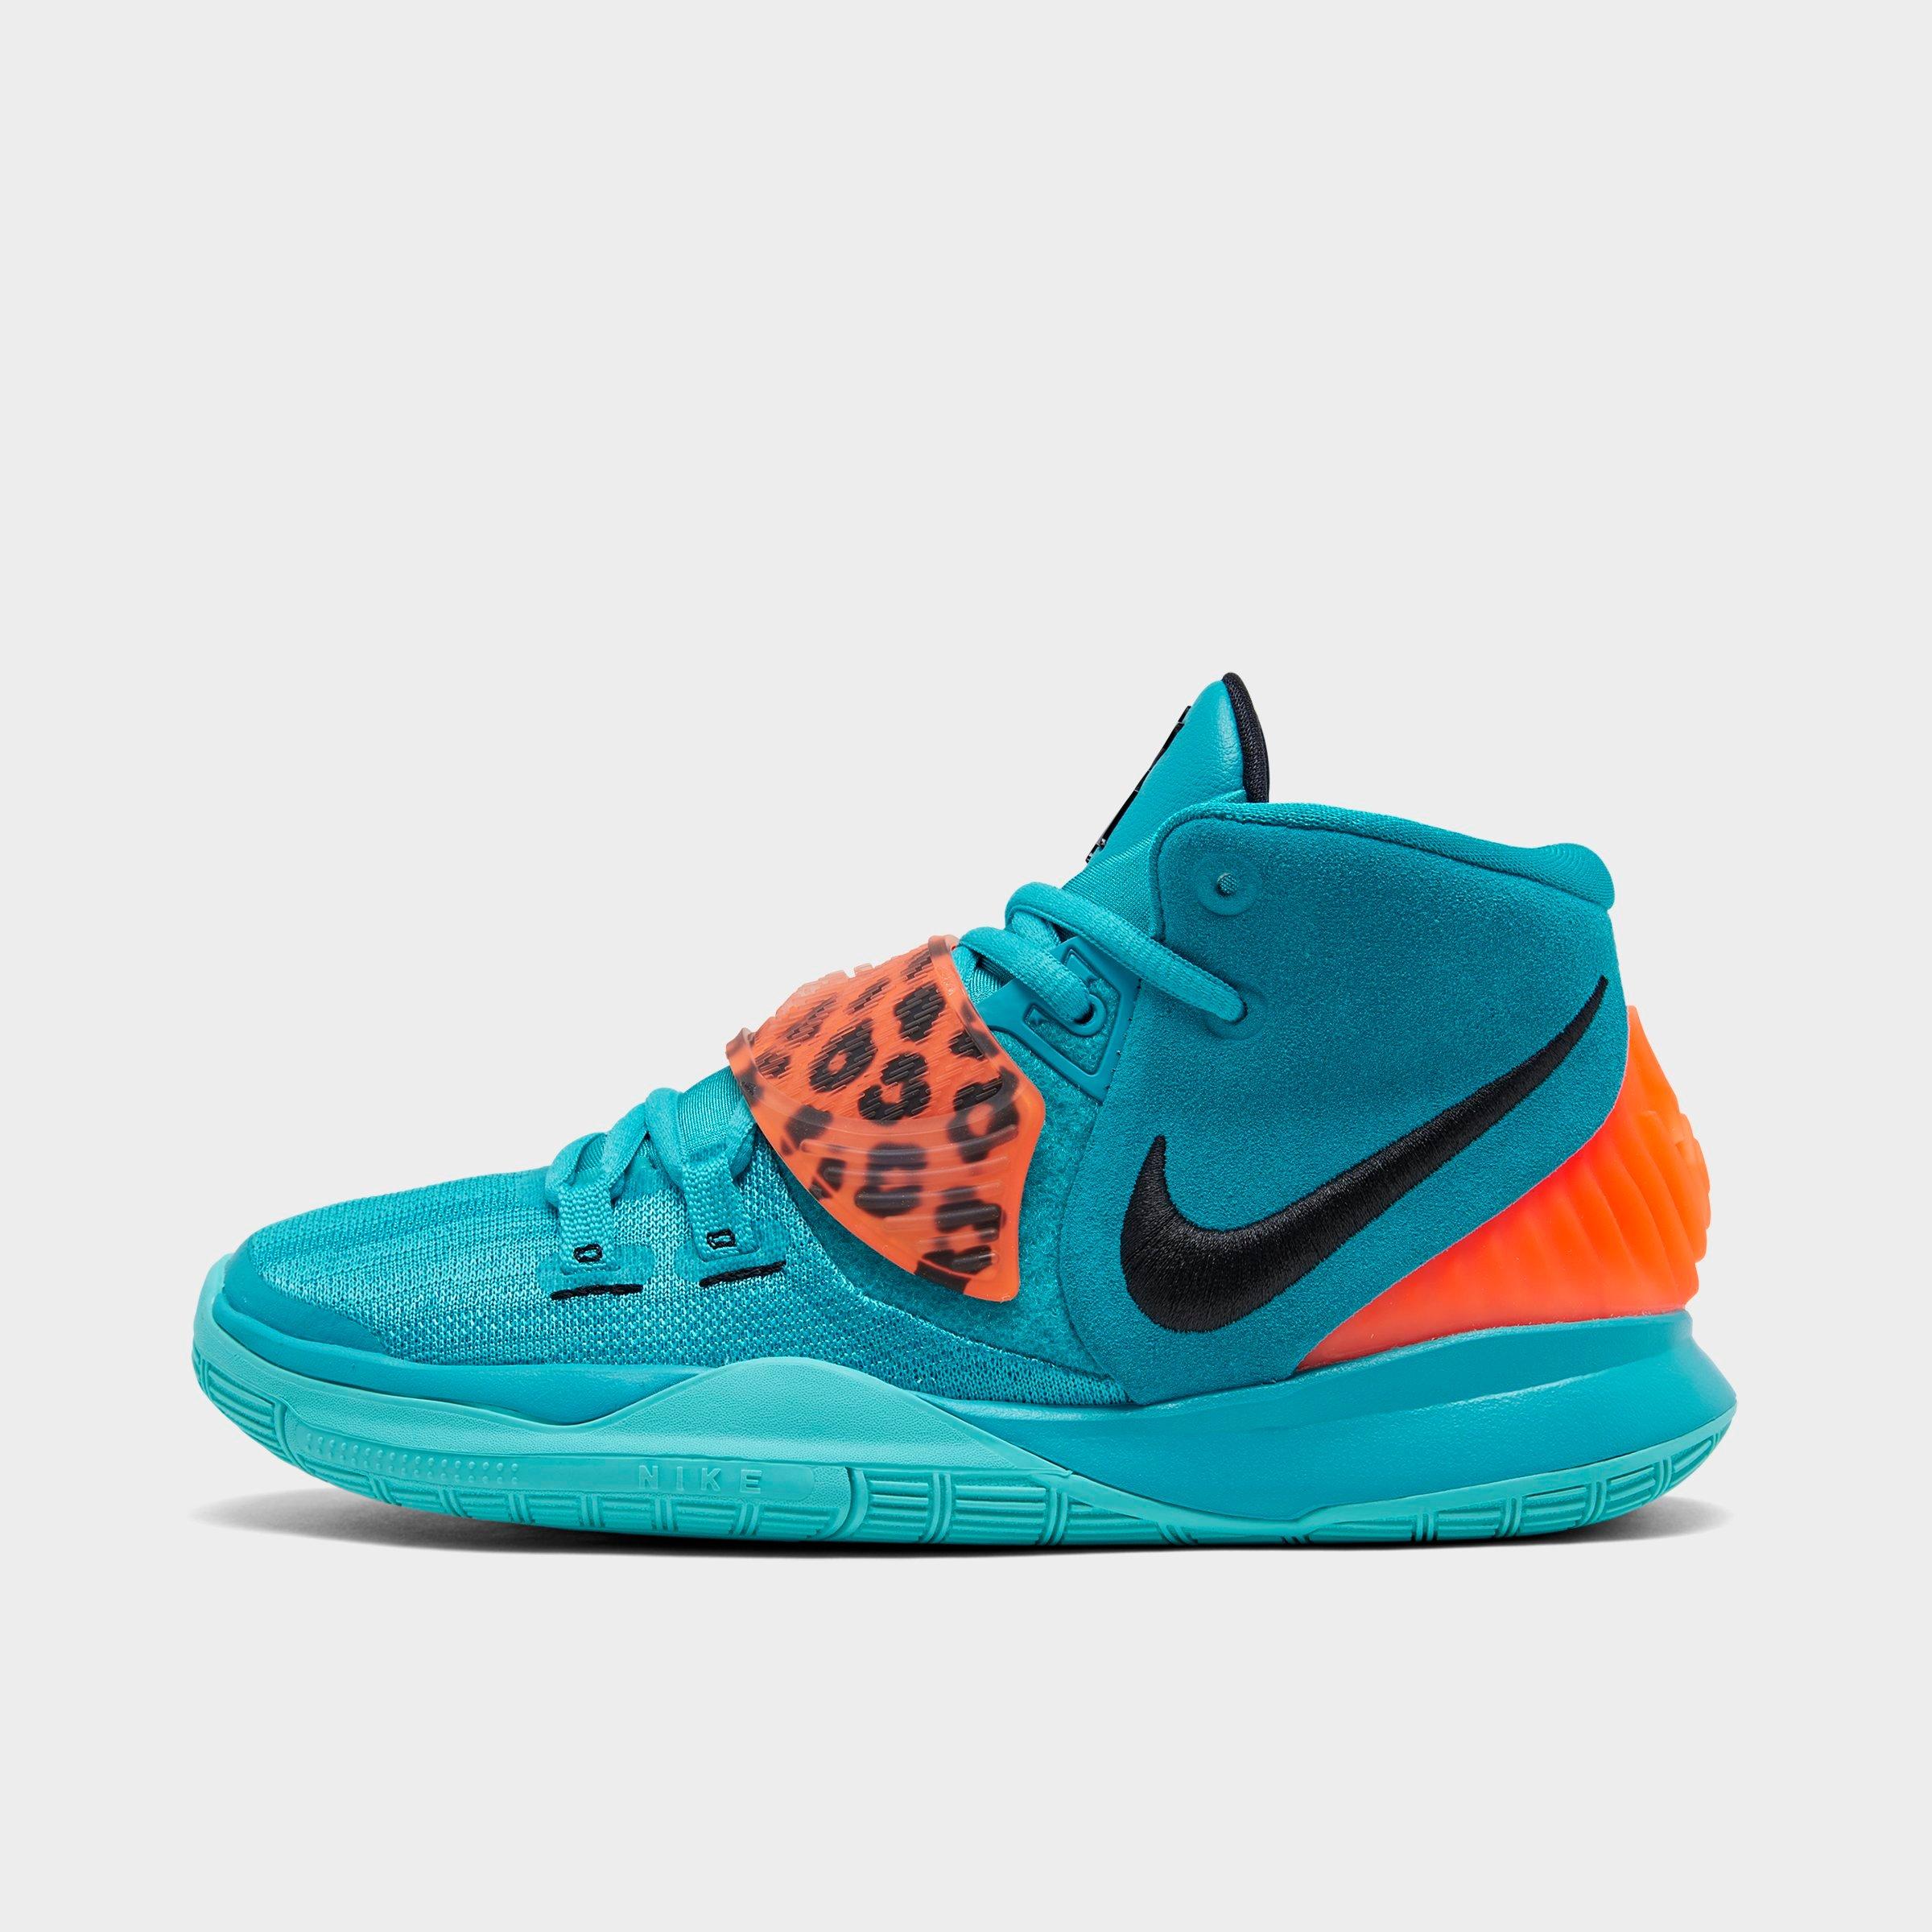 kyrie shoes basketball